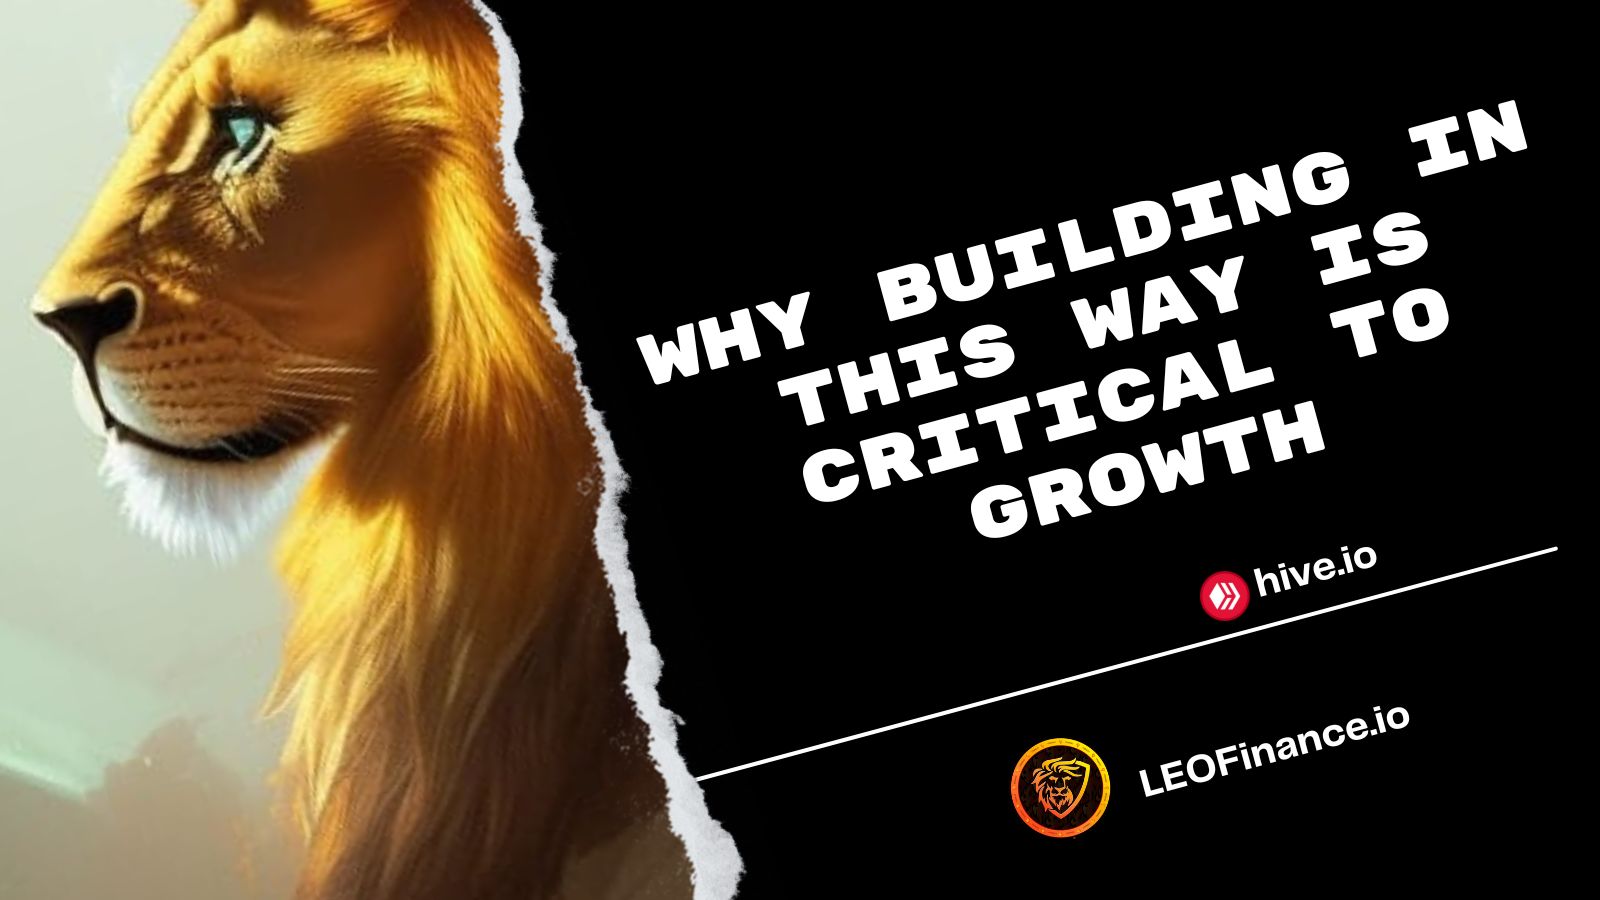 @bitcoinflood/why-building-in-this-way-is-critical-to-growth